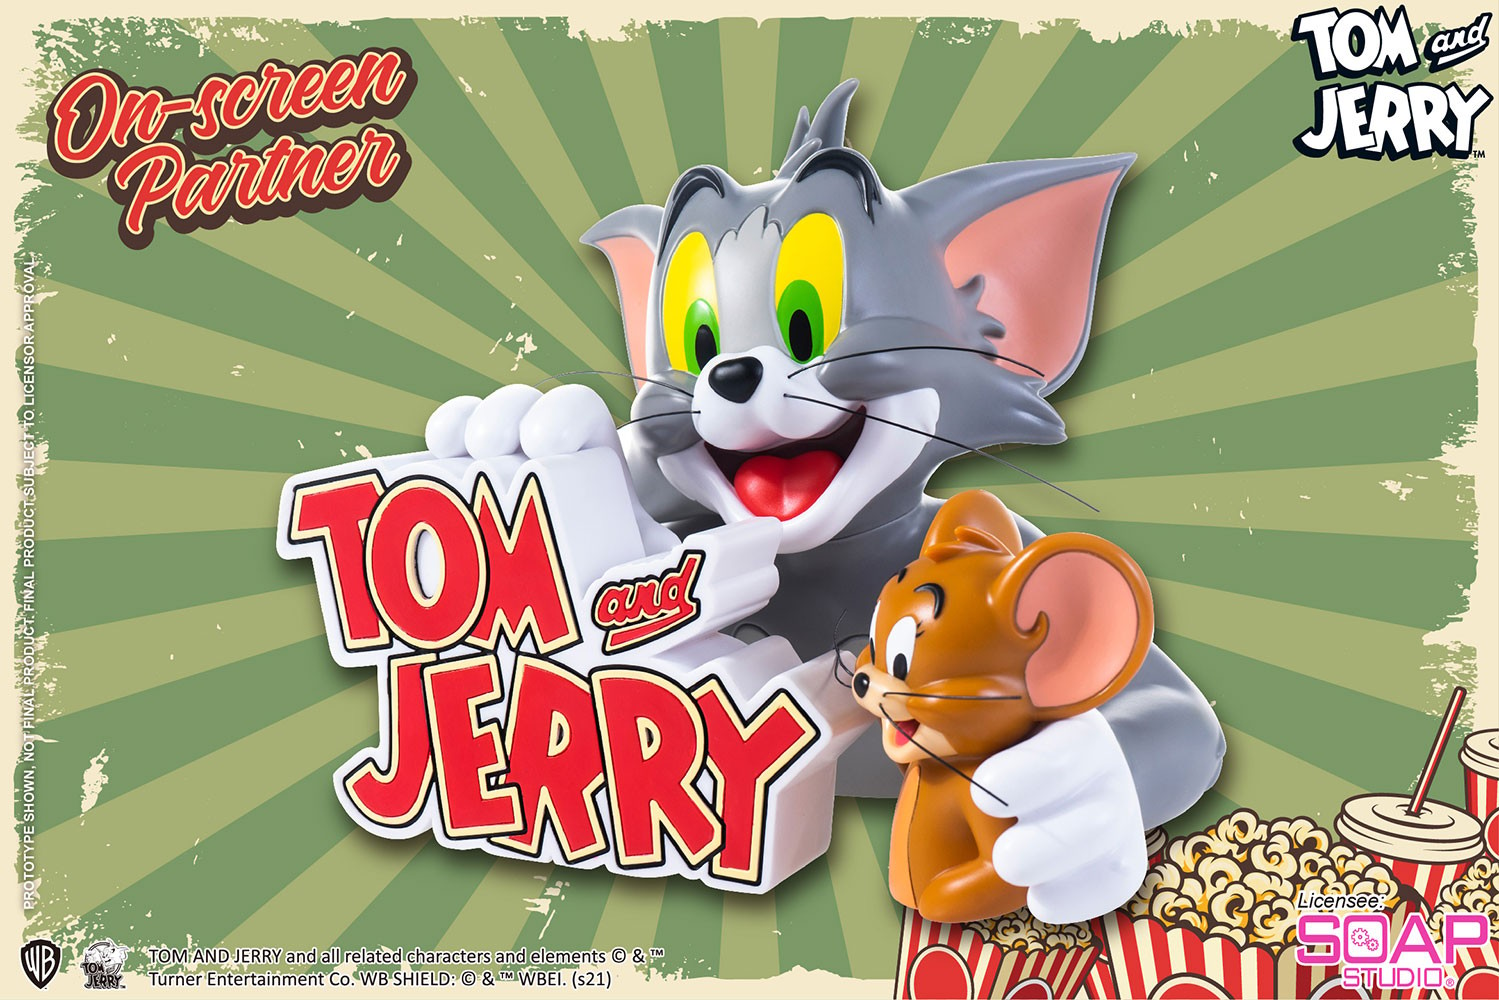 Tom and Jerry On-Screen Partner (Prototype Shown) View 3